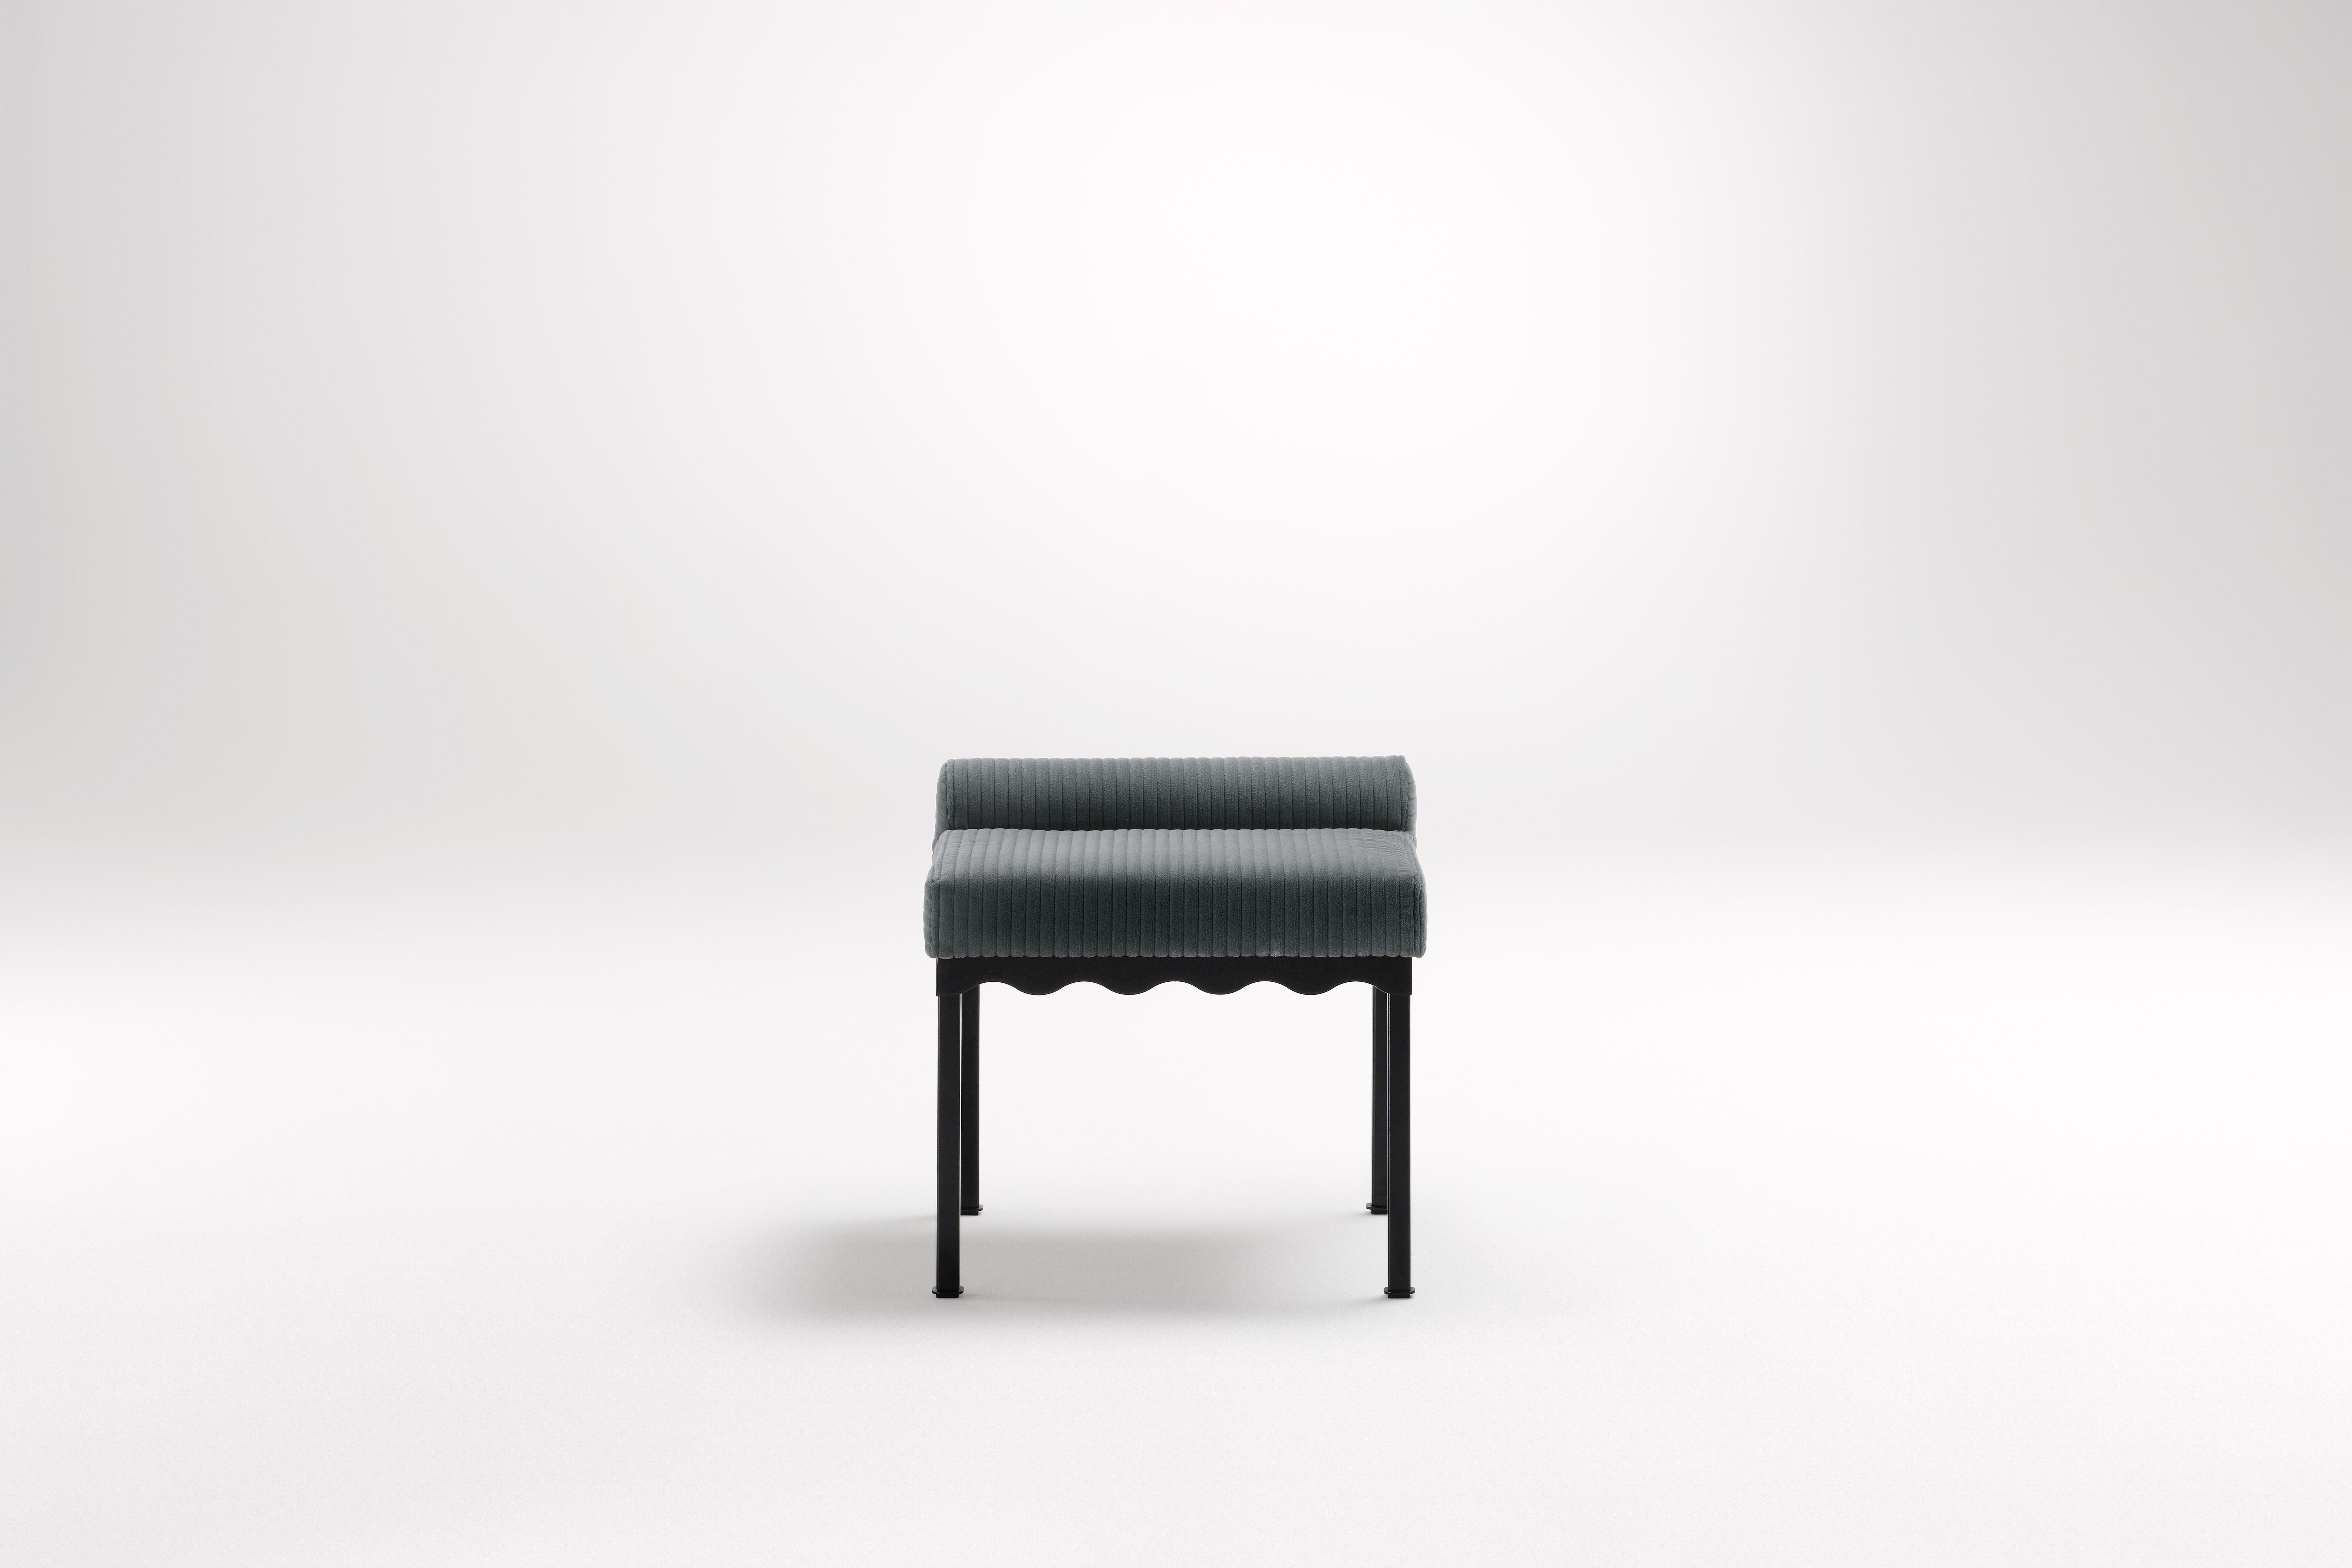 Marmoset Bellini 540 Bench by Coco Flip
Dimensions: D 54 x W 54 x H 52.5 cm
Materials: Timber / Upholstered tops, Powder-coated steel frame. 
Weight: 12 kg
Frame Finishes: Textura Black.

Coco Flip is a Melbourne based furniture and lighting design